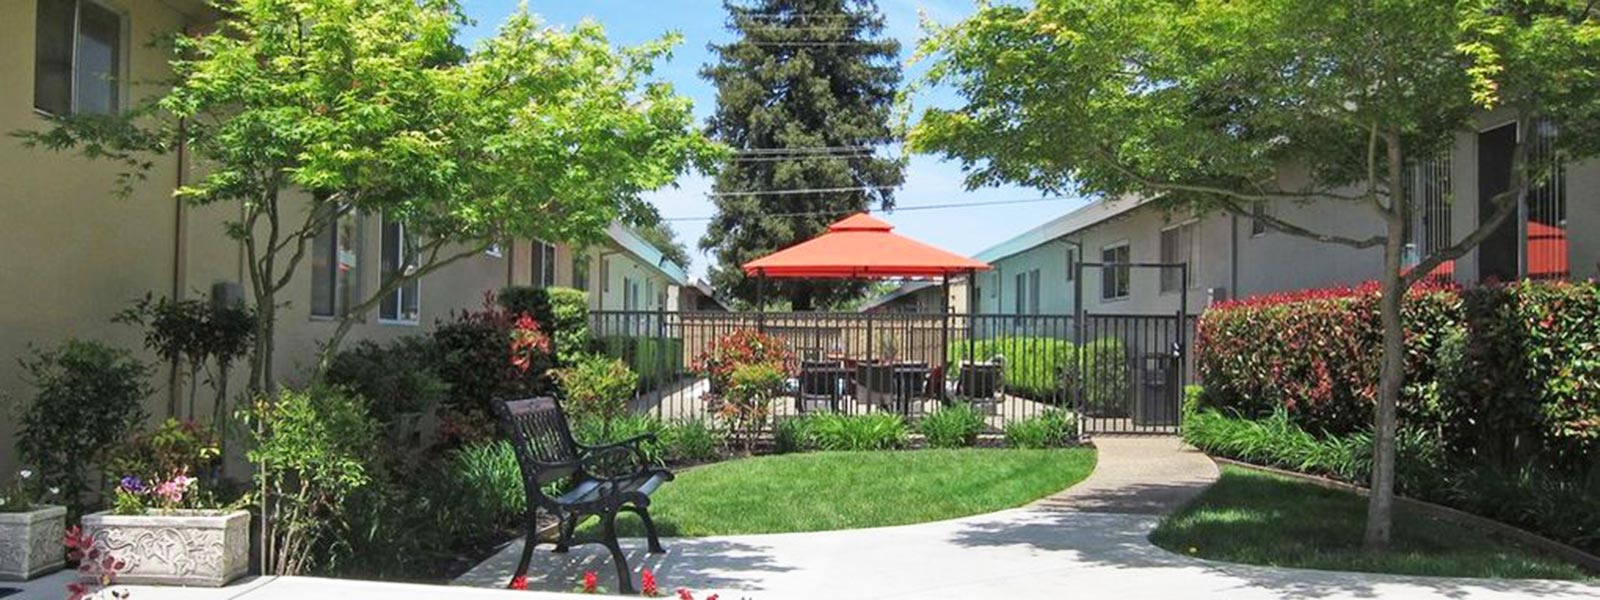 The Cottages at Folsom Apartments in Folsom, CA